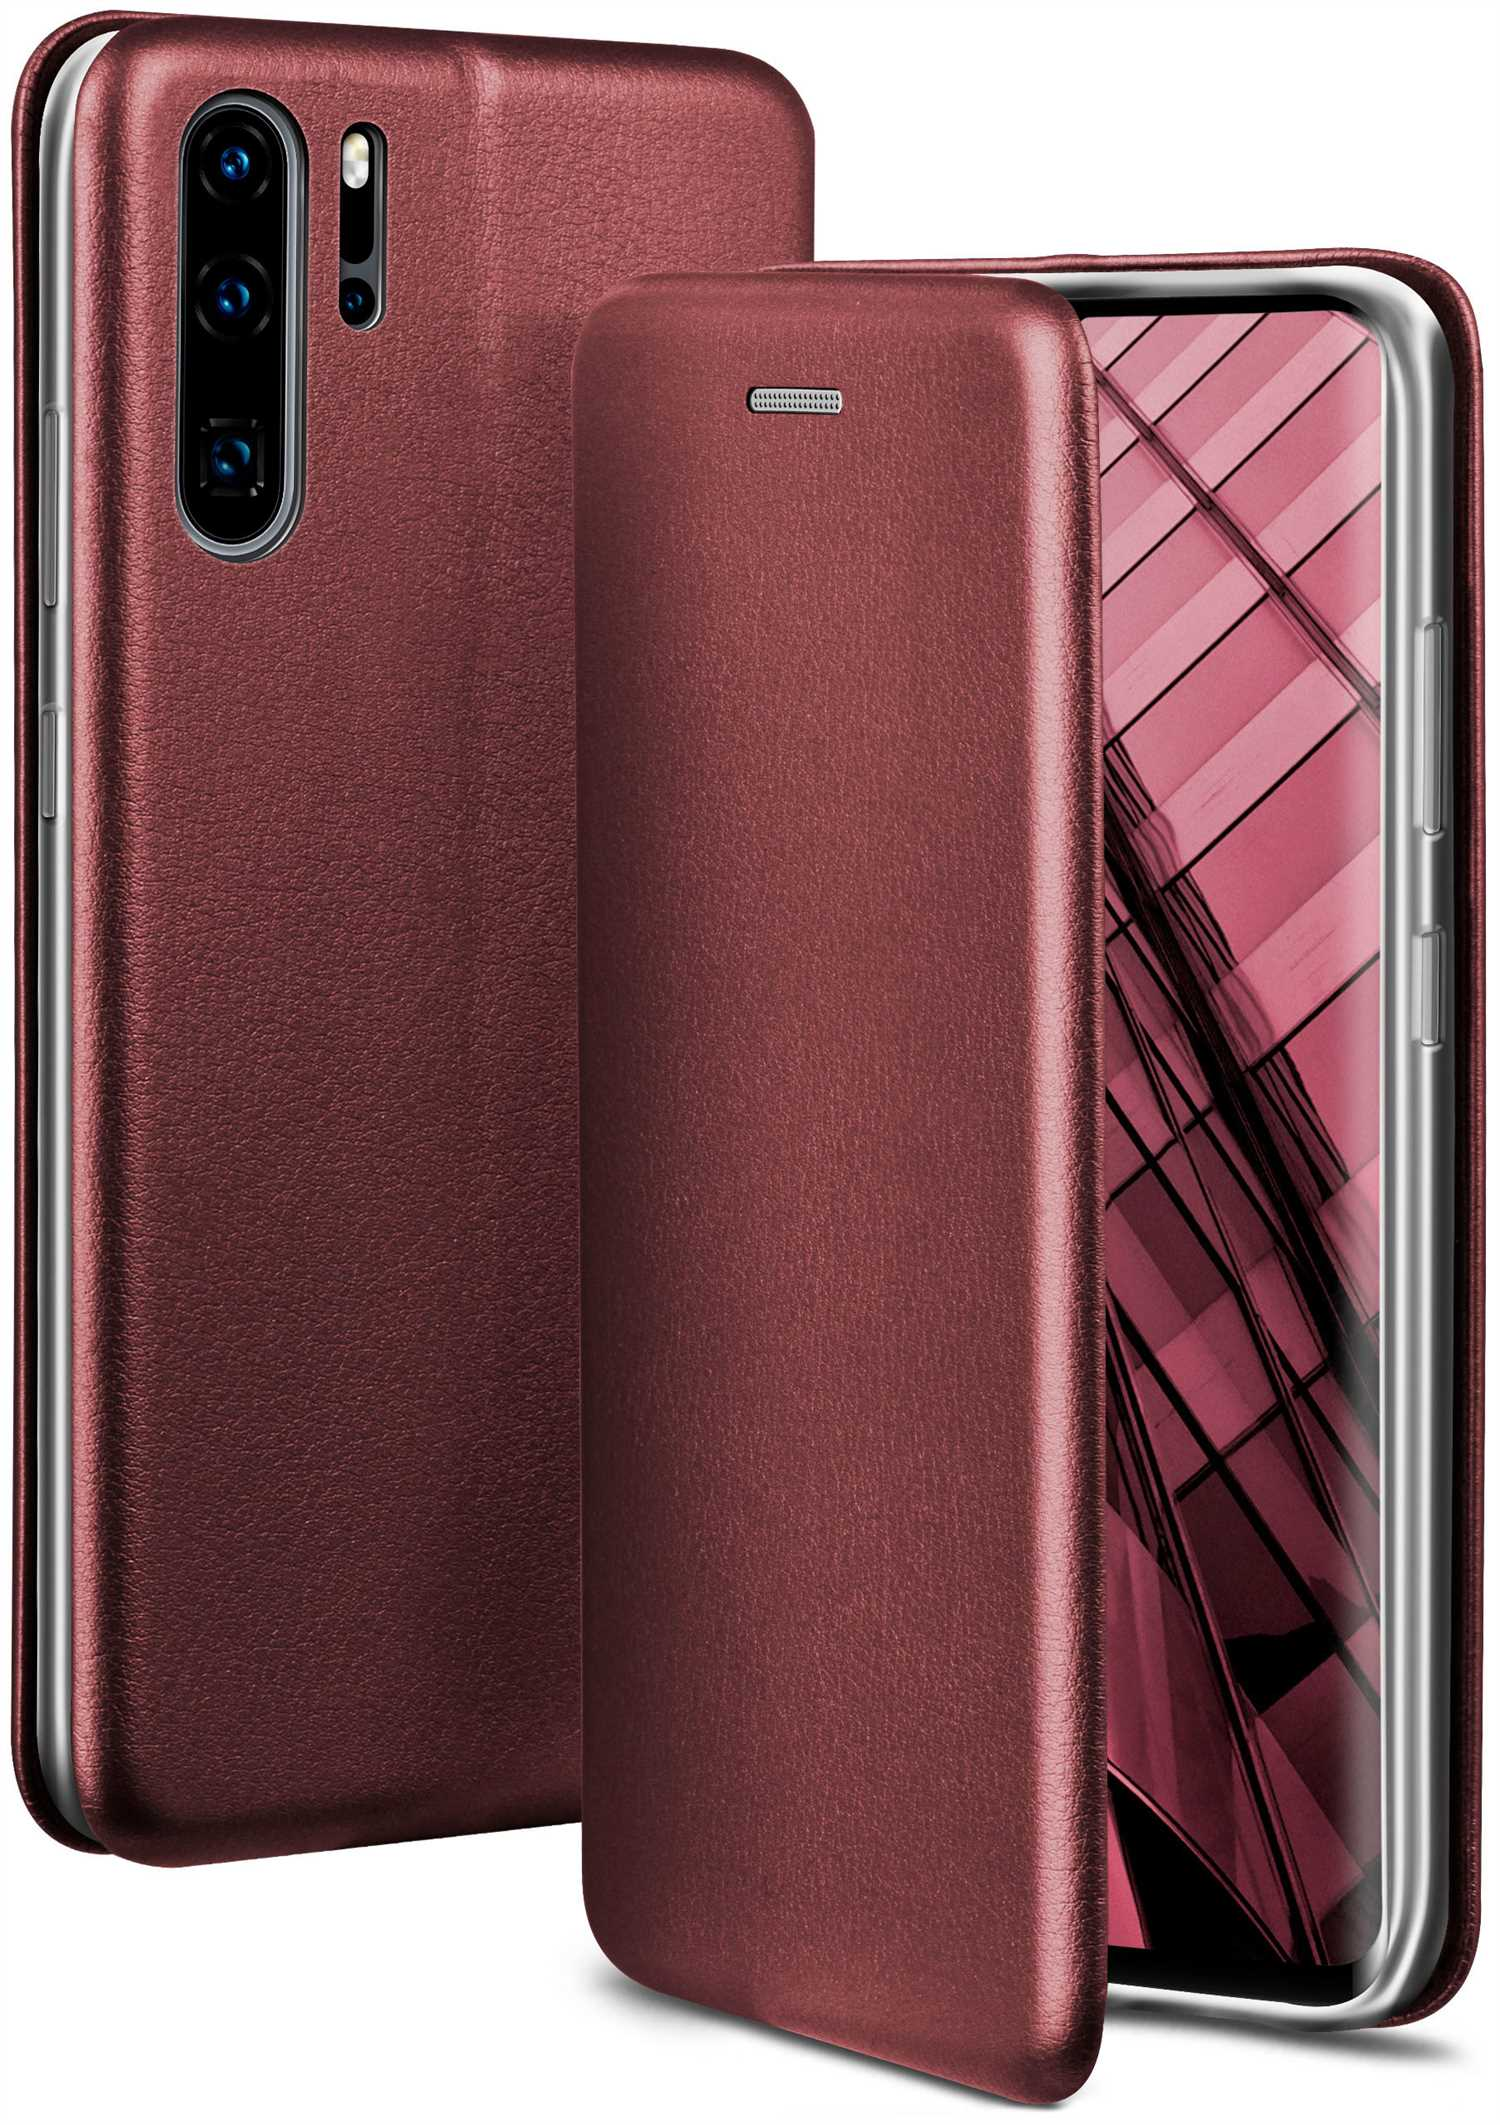 ONEFLOW Business Pro Case, P30 - Huawei, Cover, Edition, New Flip Burgund Red